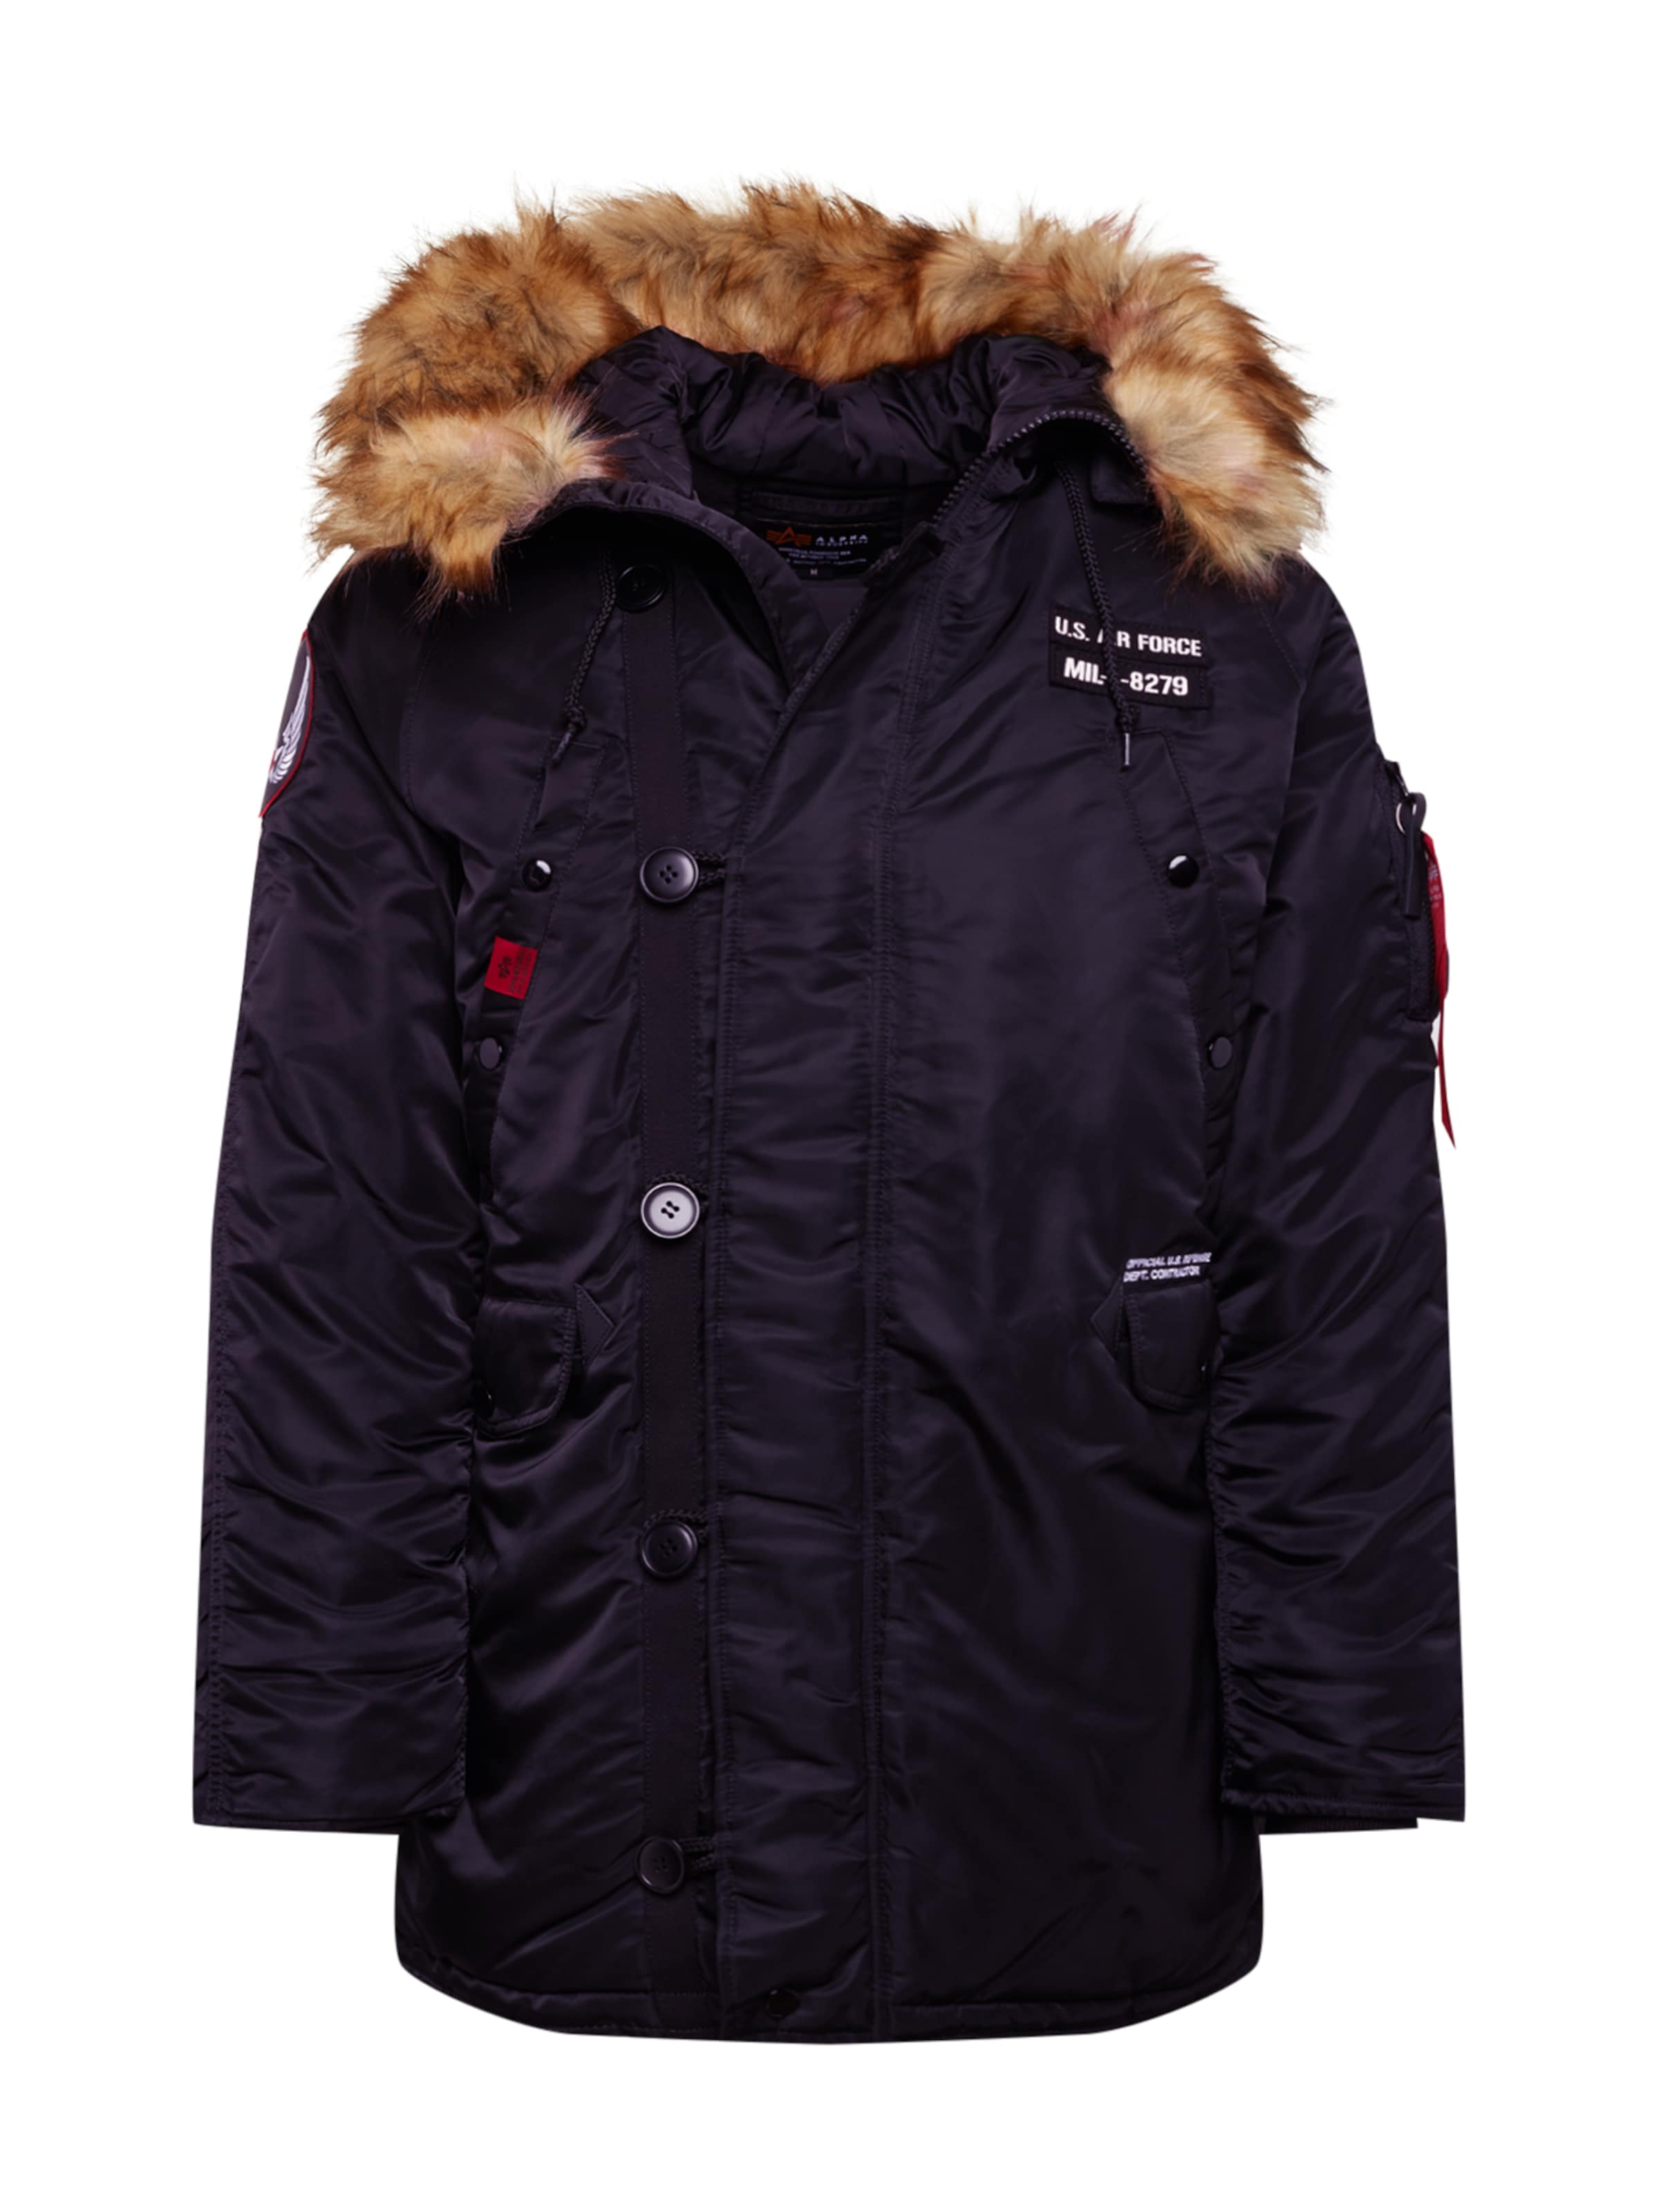 sL5iW Uomo ALPHA INDUSTRIES Giacca invernale Airborne in Nero 